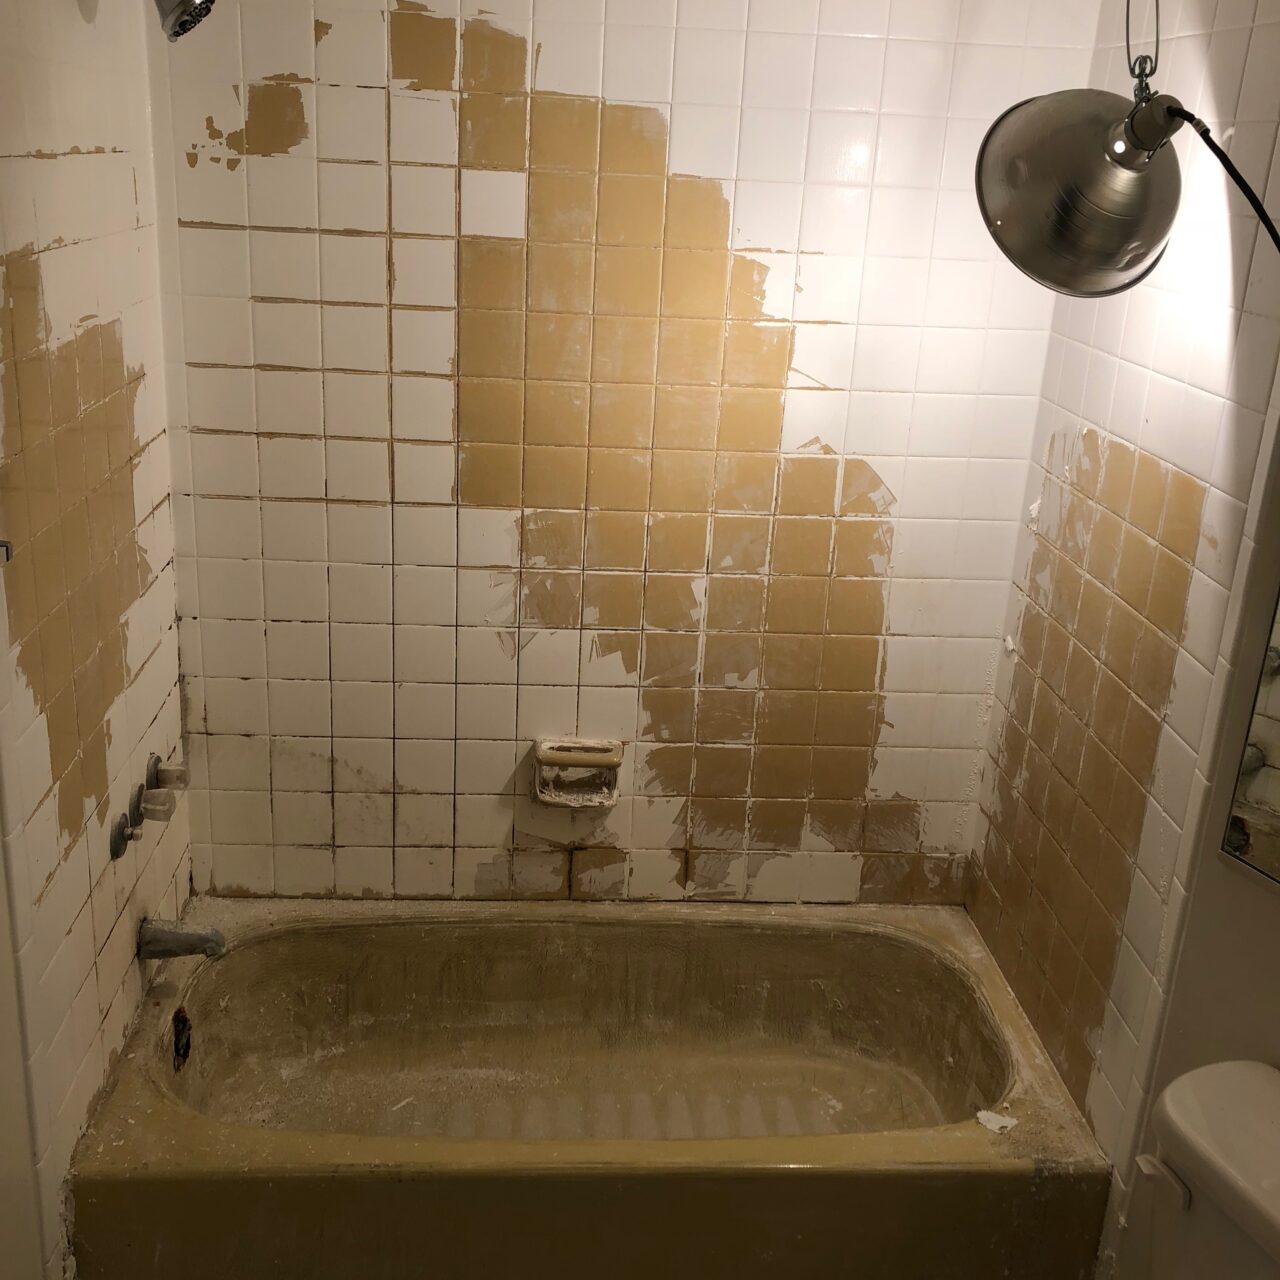 A bathtub and shower with stained surfaces